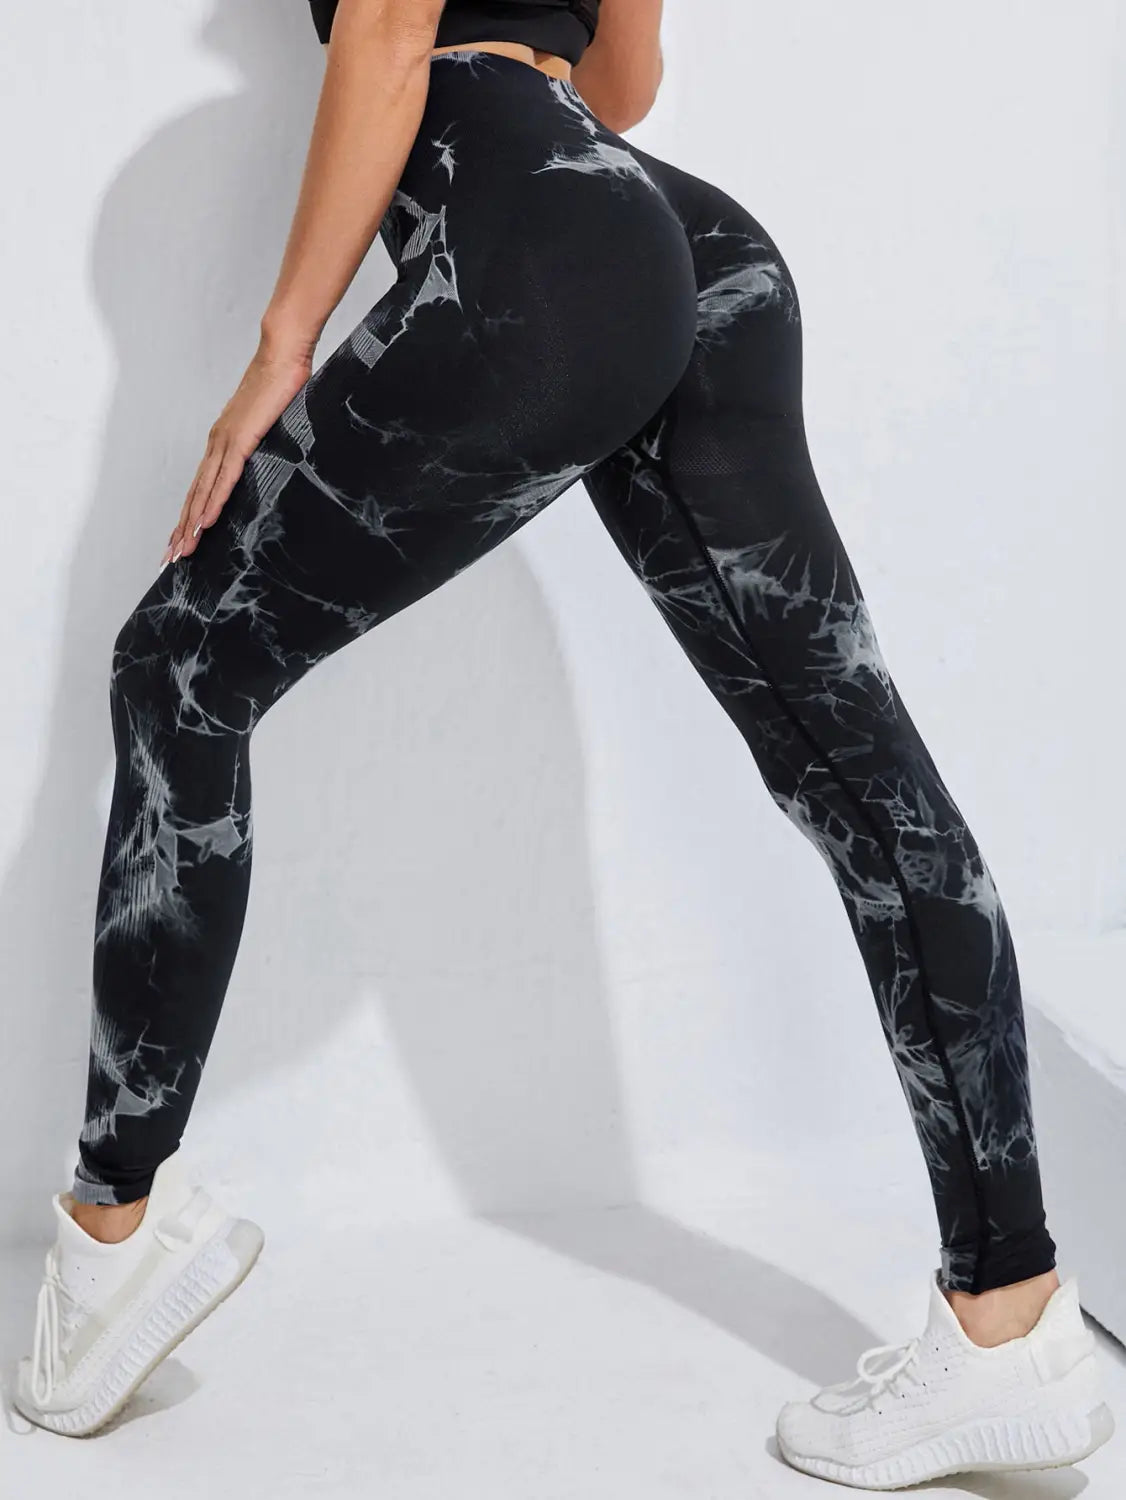 K-AROLE seamless yoga tights: comfort and style for your